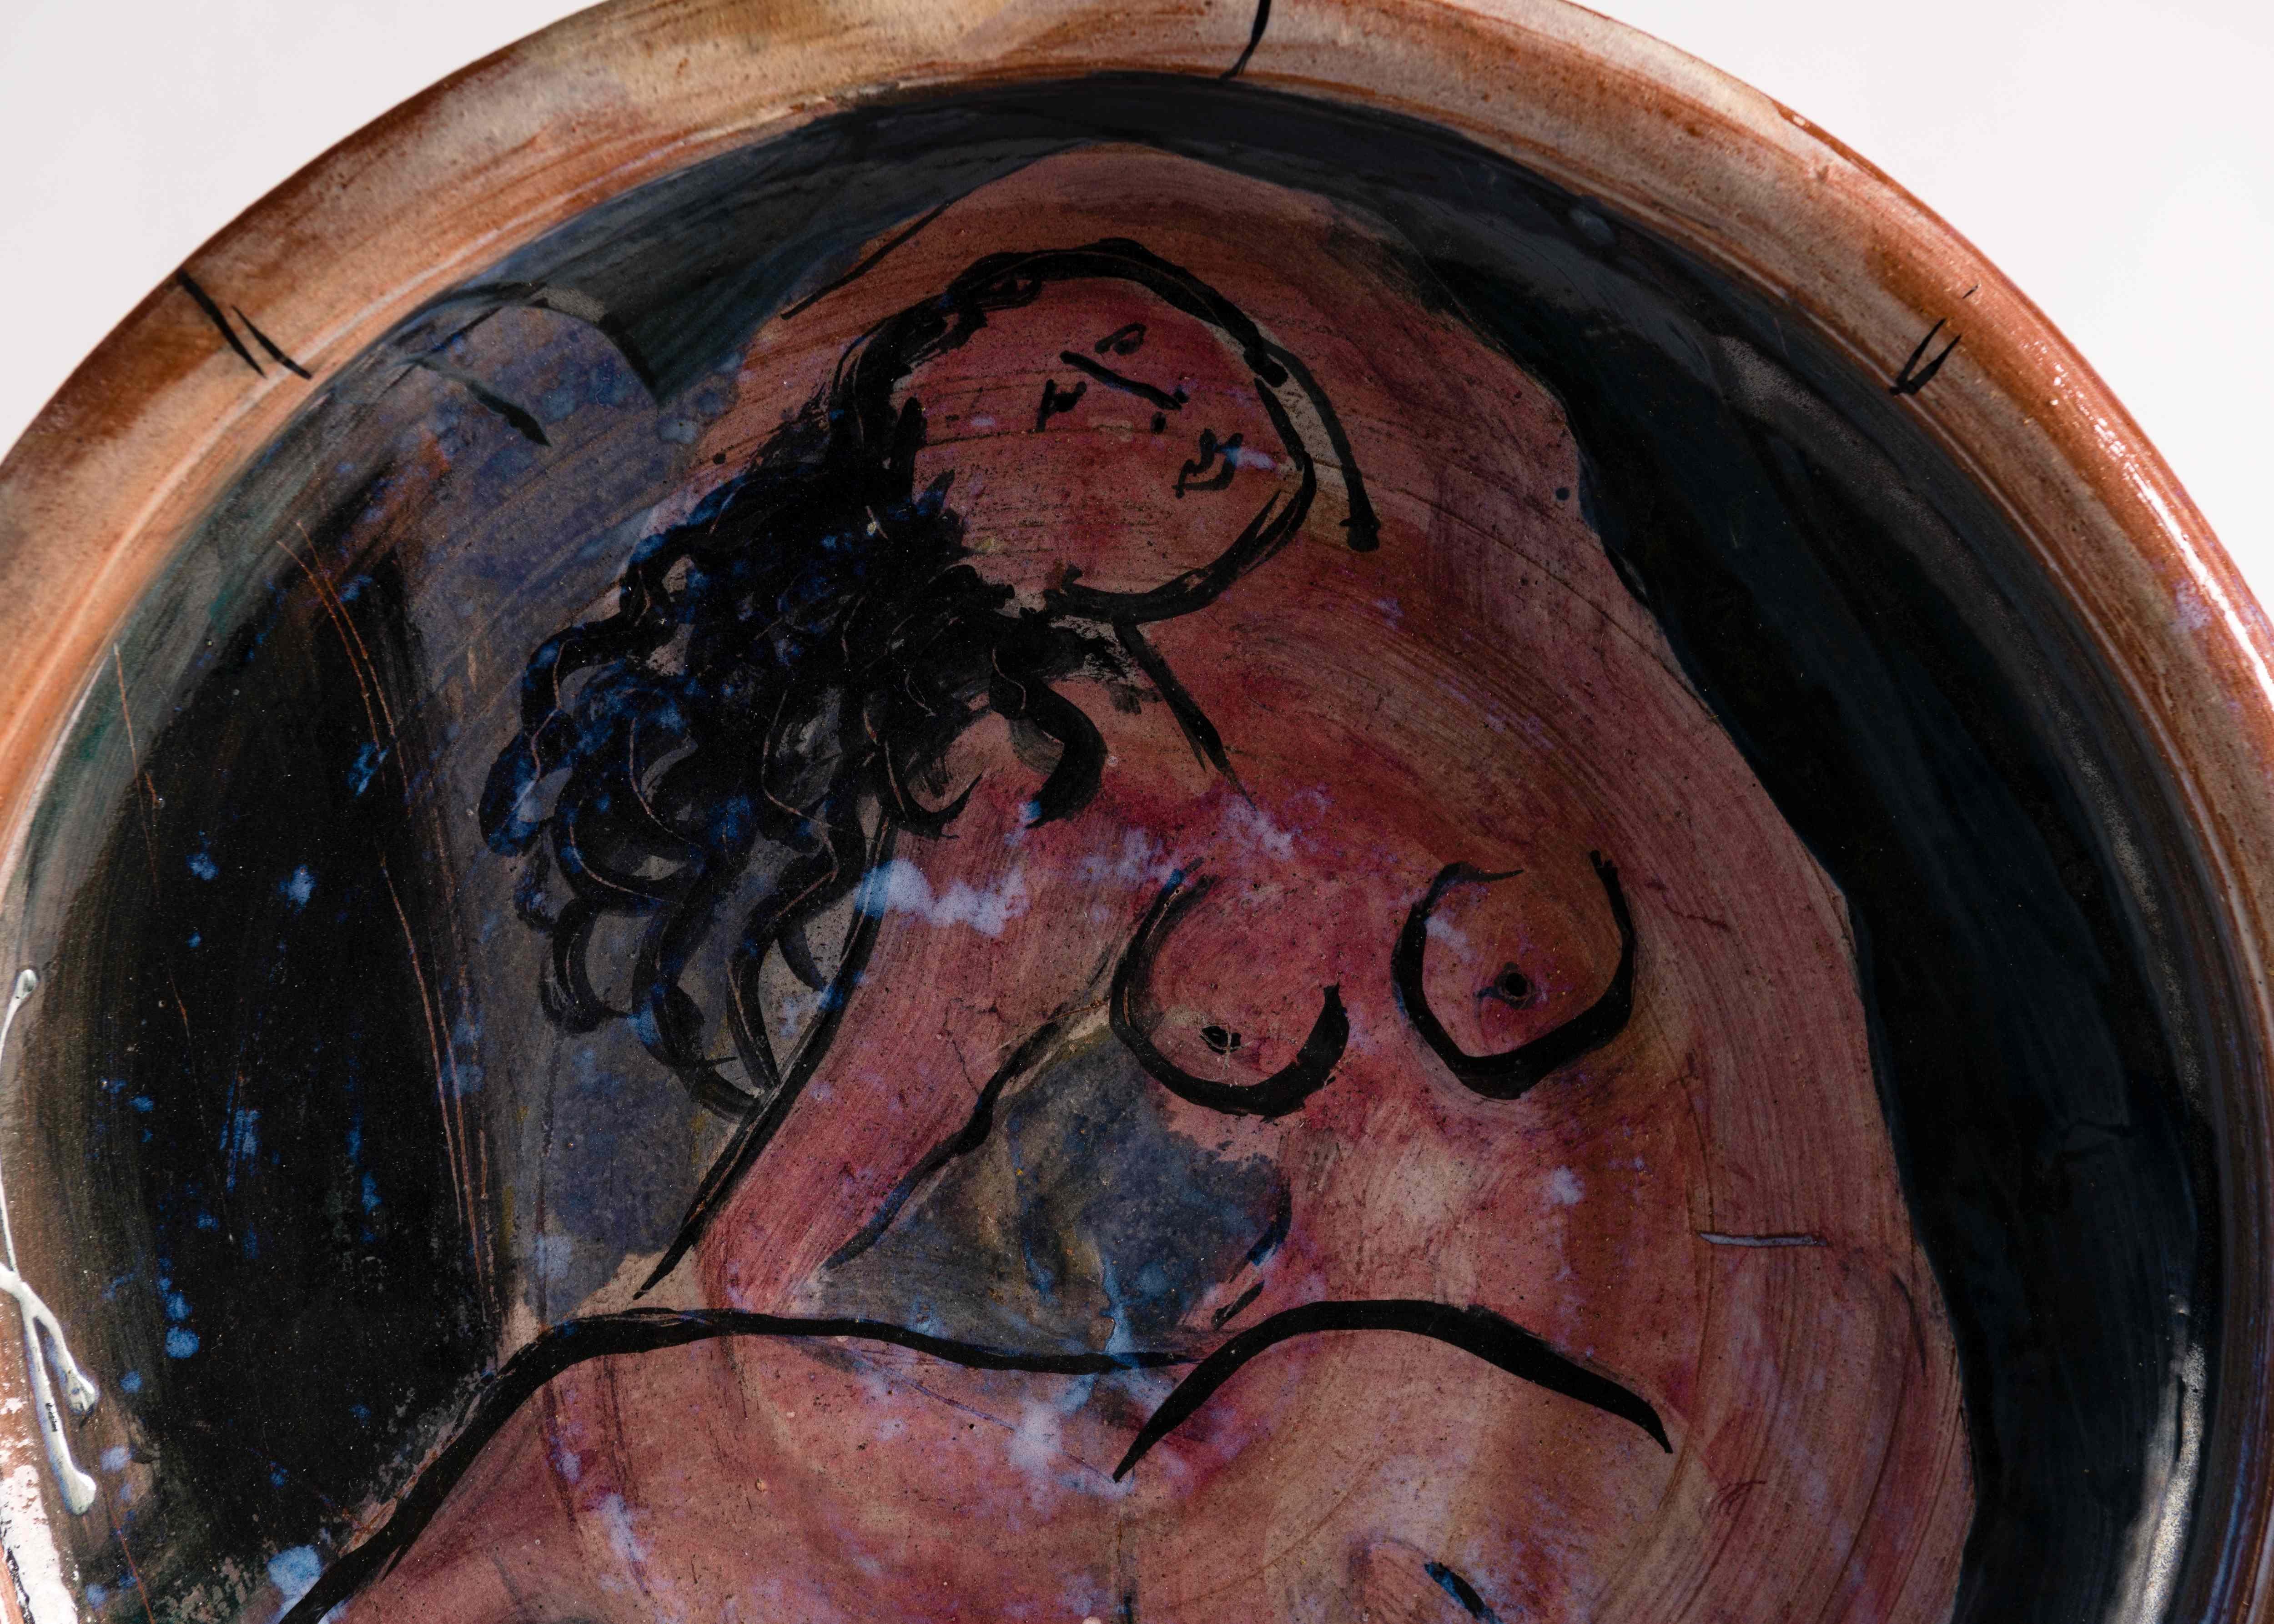 This exquisite glazed ceramic charger features a picture of a reclining nude, a clever recreation of a western subject in new terms appropriate to a work situated in its time and place. Figured roughly, and featured at the center of a decorative